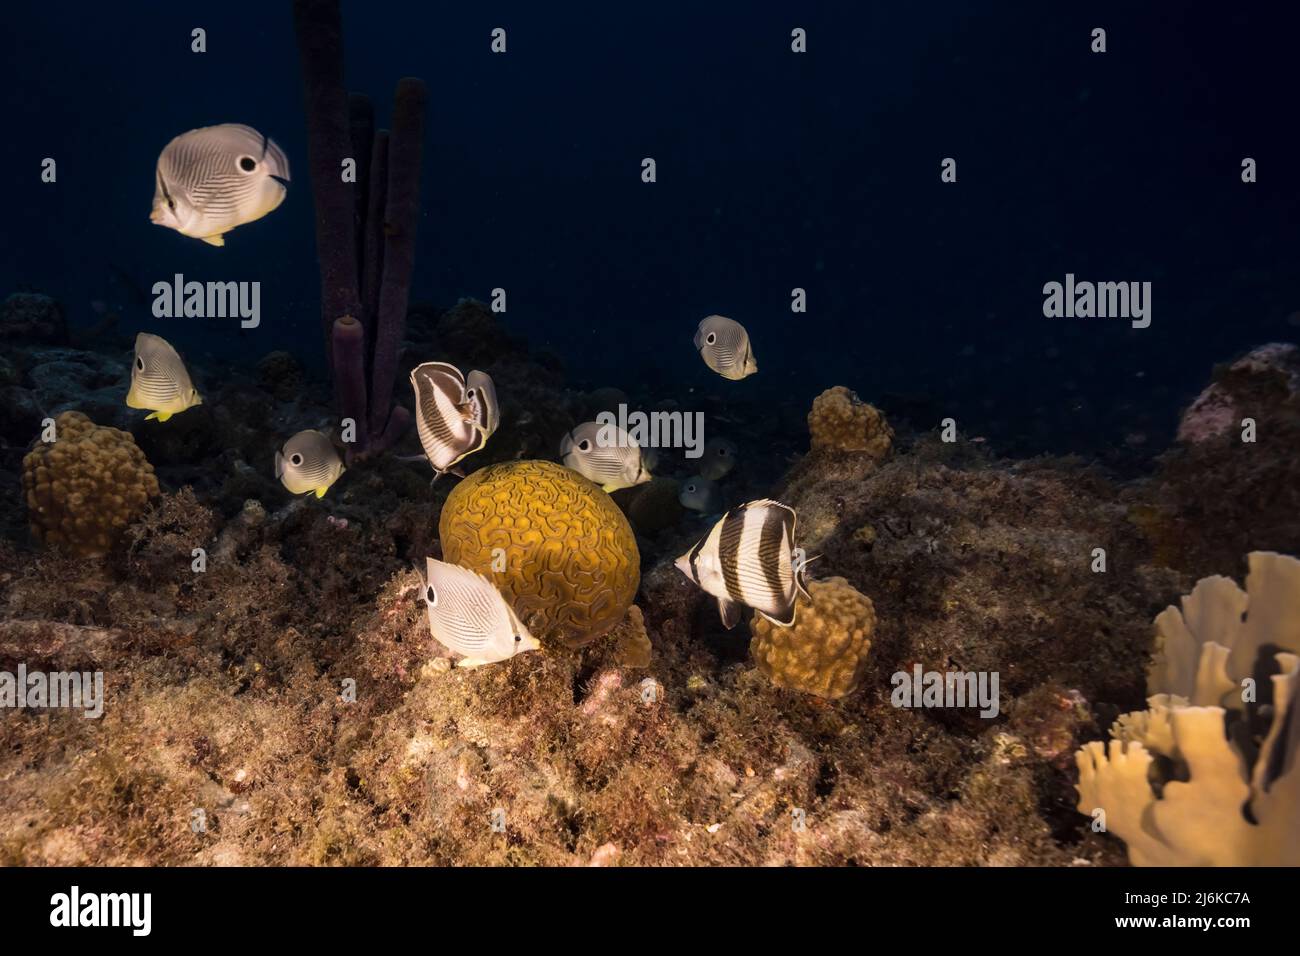 Seascape with Butterflyfish while spawning of Grooved Brain Coral in coral reef of Caribbean Sea, Curacao Stock Photo